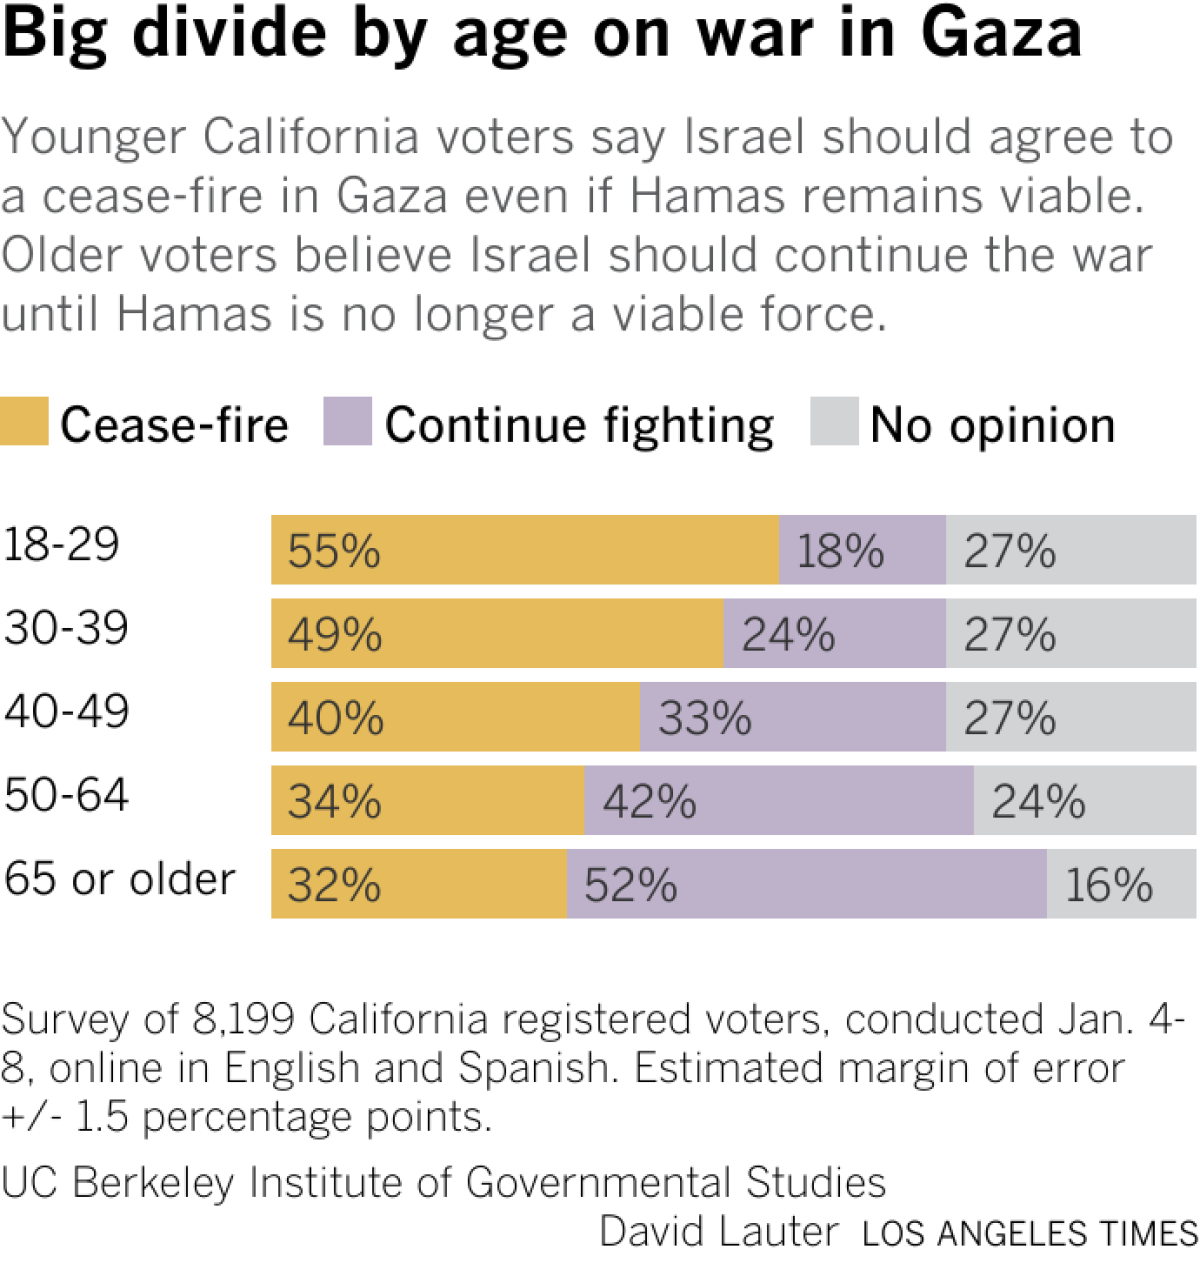 Younger California voters say Israel should agree to a cease-fire in Gaza even if Hamas remains viable. Older voters believe Israel should continue the war until Hamas is no longer a viable force.